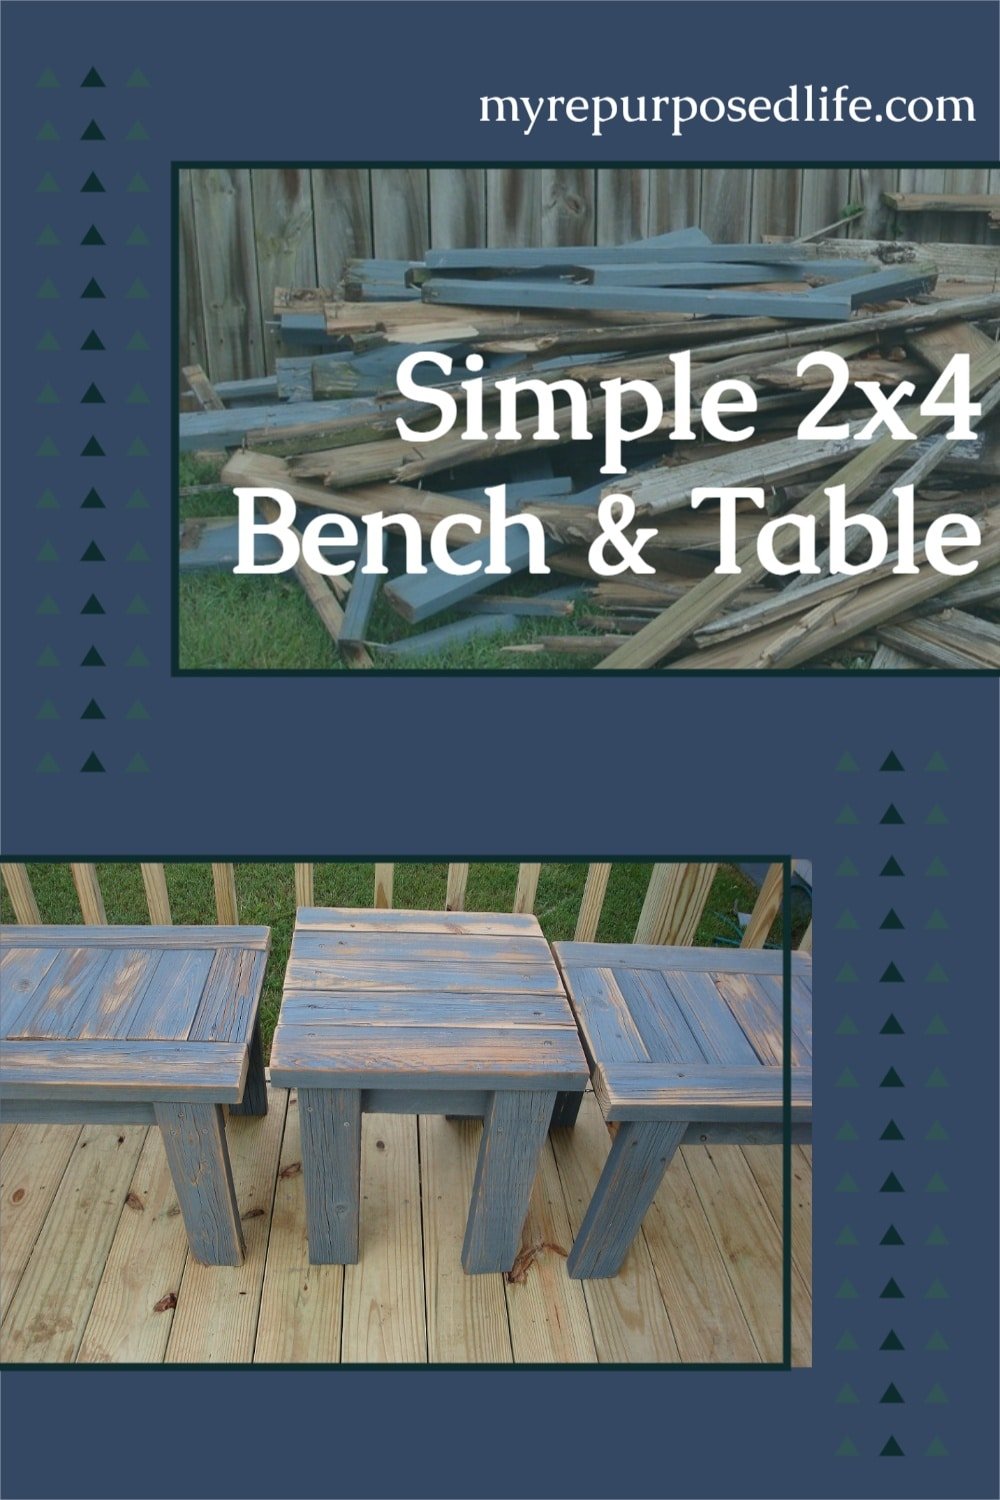 How to make a simple bench from scrap reclaimed lumber. After removing an old deck I salvaged some of the boards to make simple benches from 2x4's. #MyRepurposedLife #repurposed #reclaimed #lumber #2x4 #bench via @repurposedlife